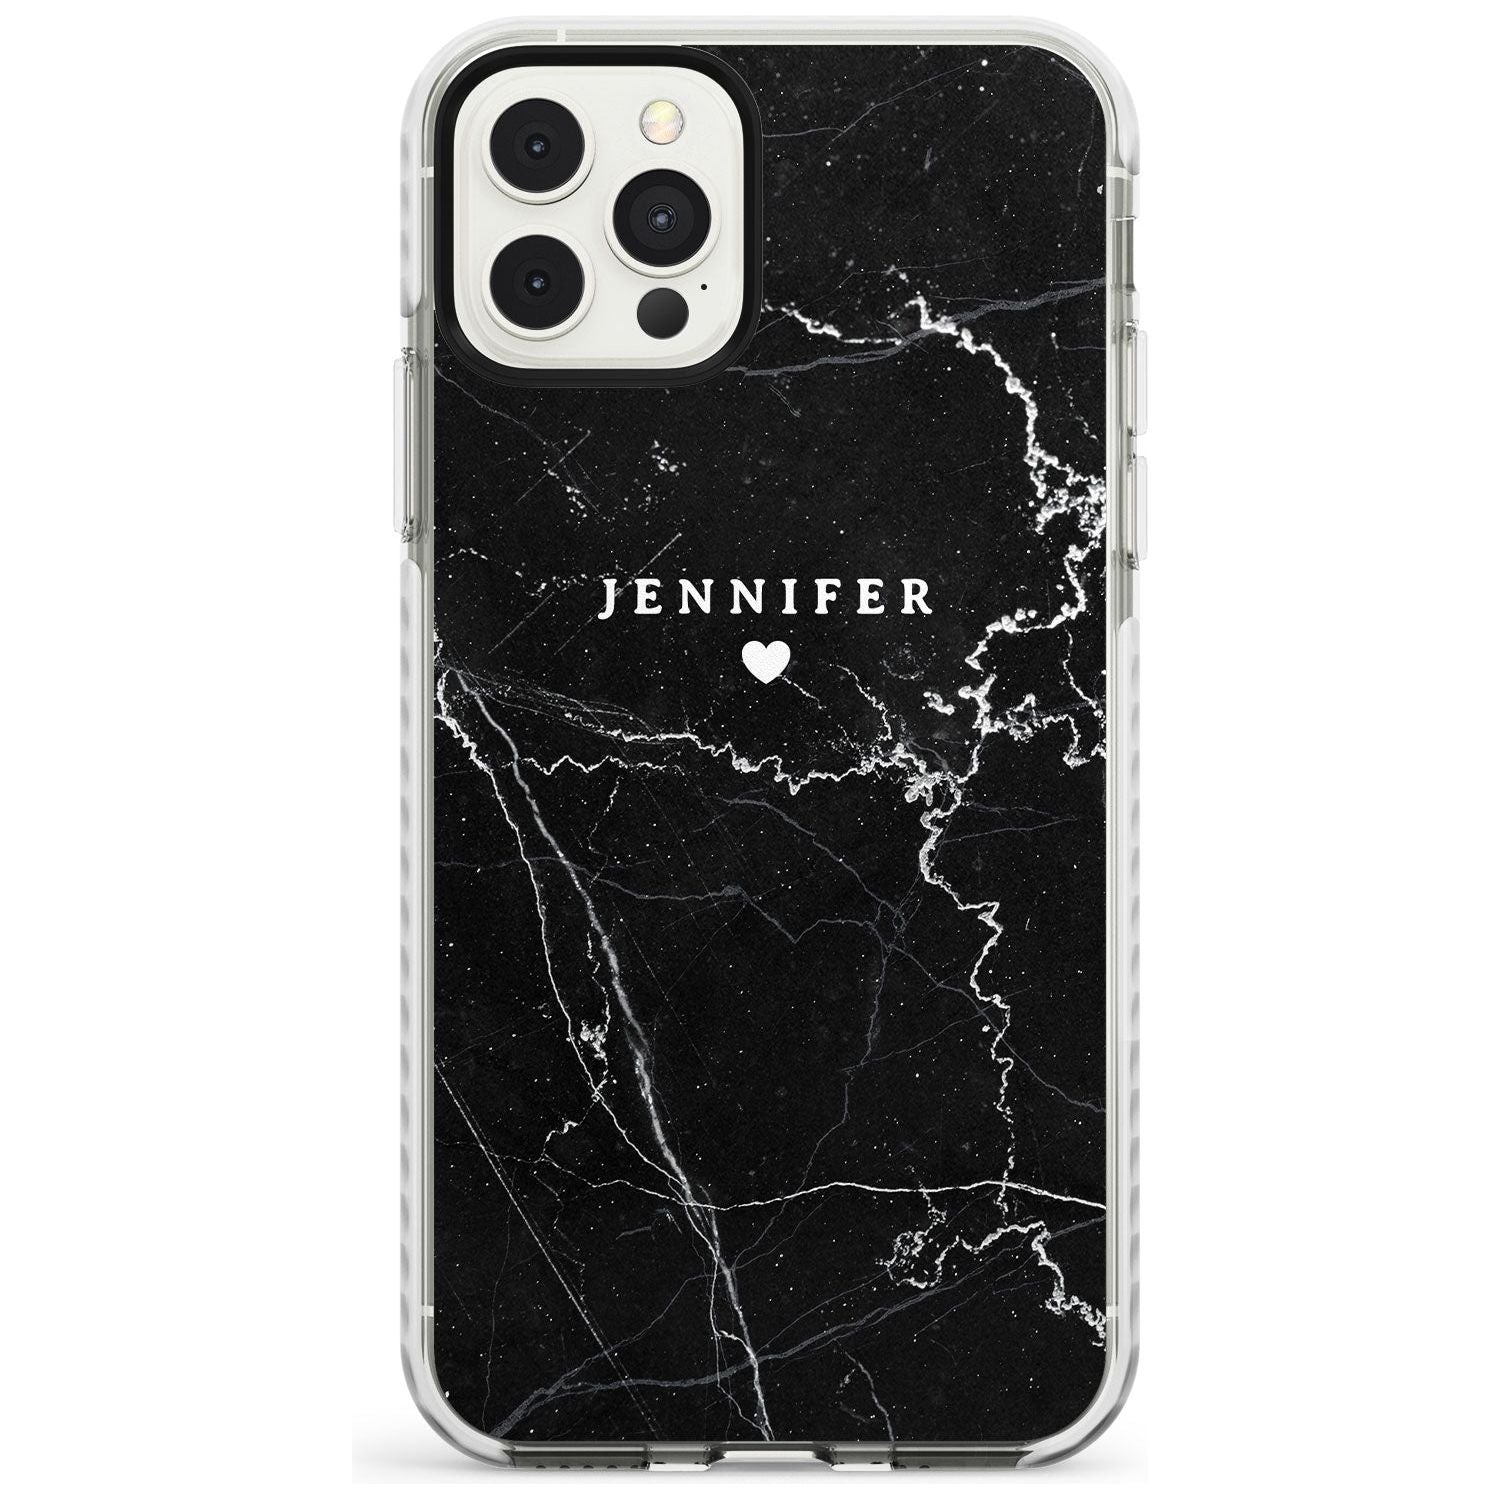 Personalised Black Marble Slim TPU Phone Case for iPhone 11 Pro Max